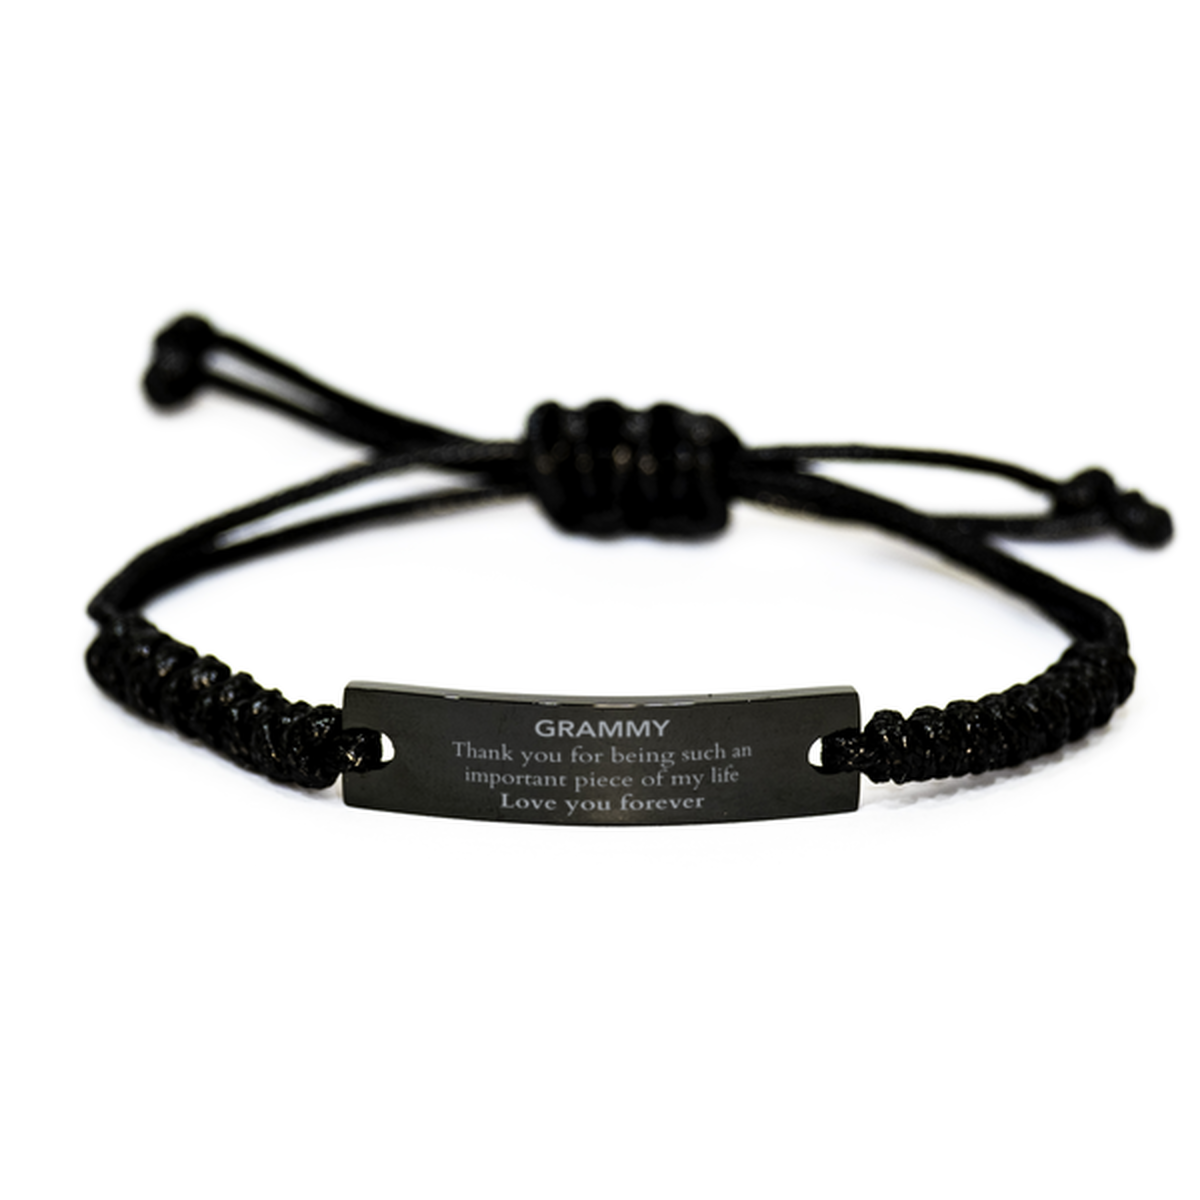 Appropriate Grammy Black Rope Bracelet Epic Birthday Gifts for Grammy Thank you for being such an important piece of my life Grammy Christmas Mothers Fathers Day